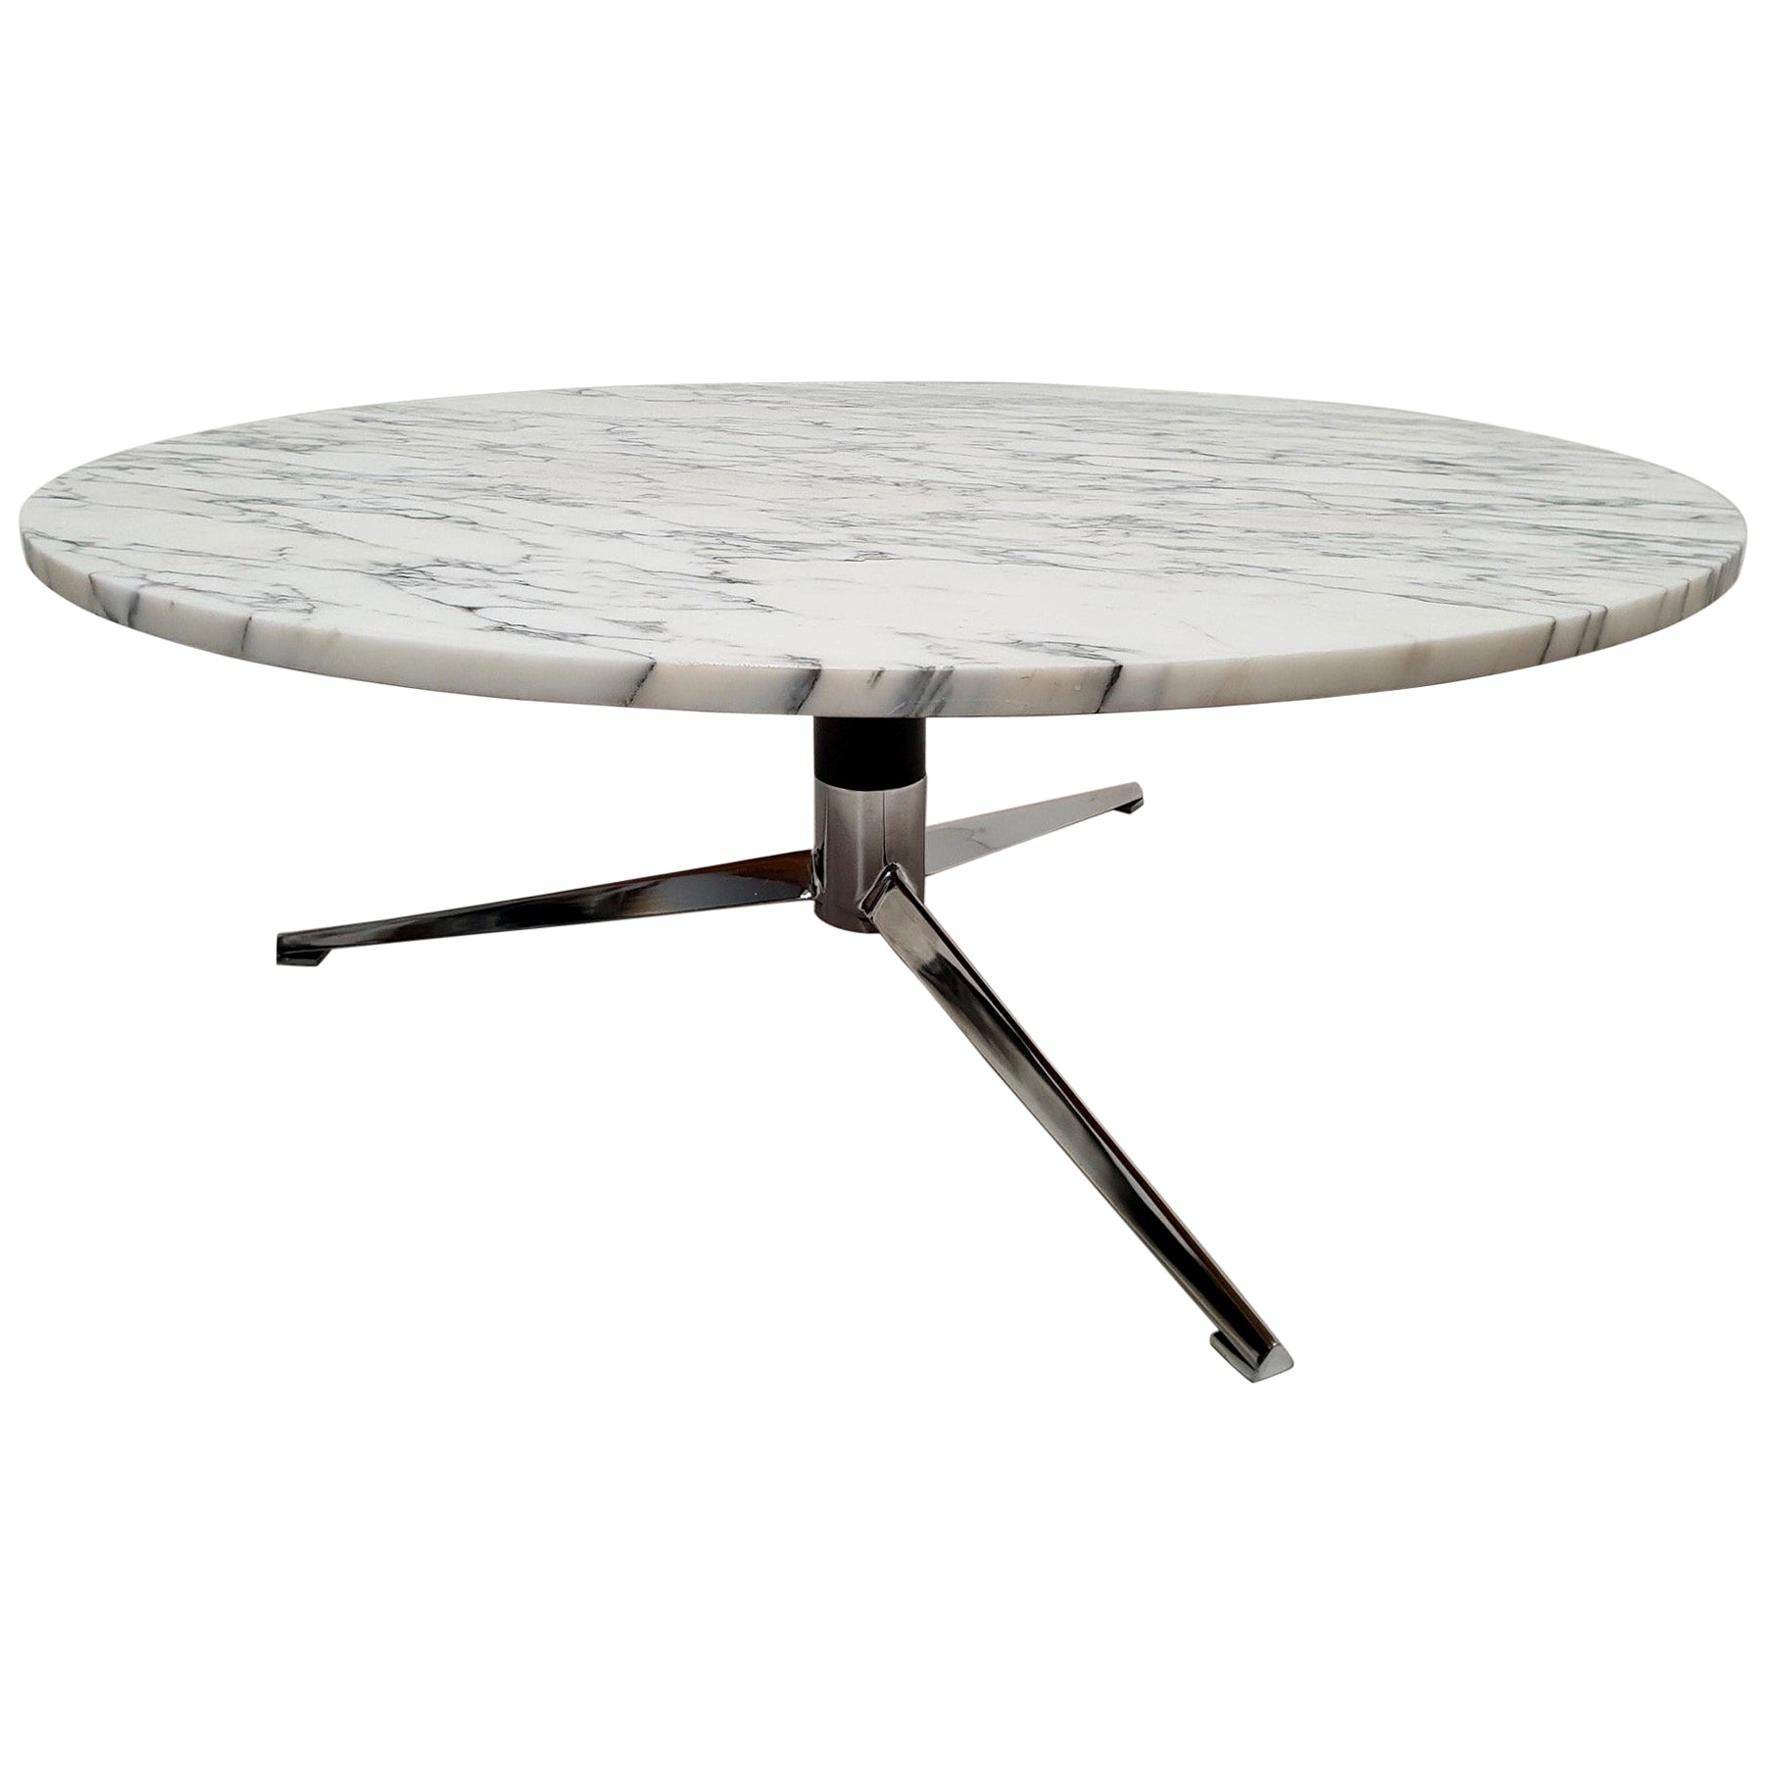 Midcentury Italian Modern Polished Metal and Marble Round Circular Coffee Table